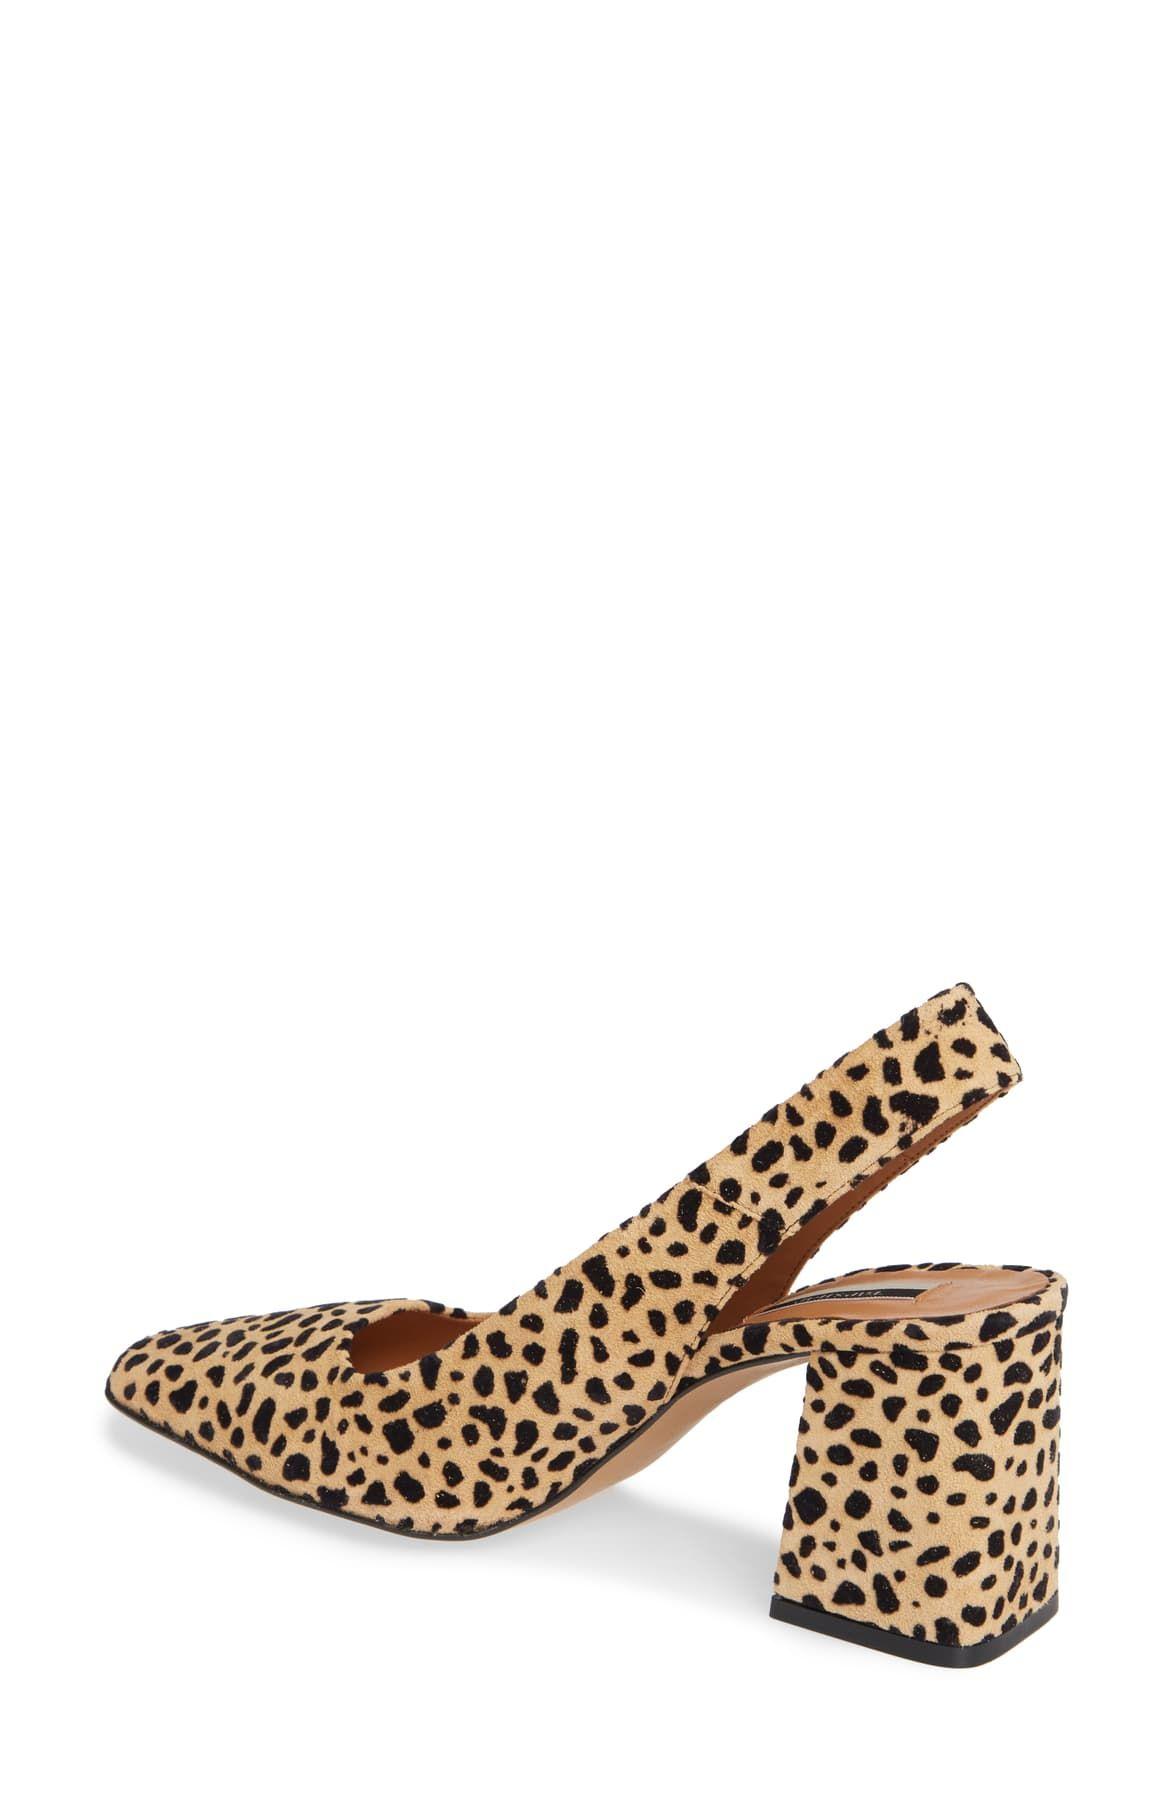 TOPSHOP Gainor Leopard Print Slingback Shoes in Brown | Lyst